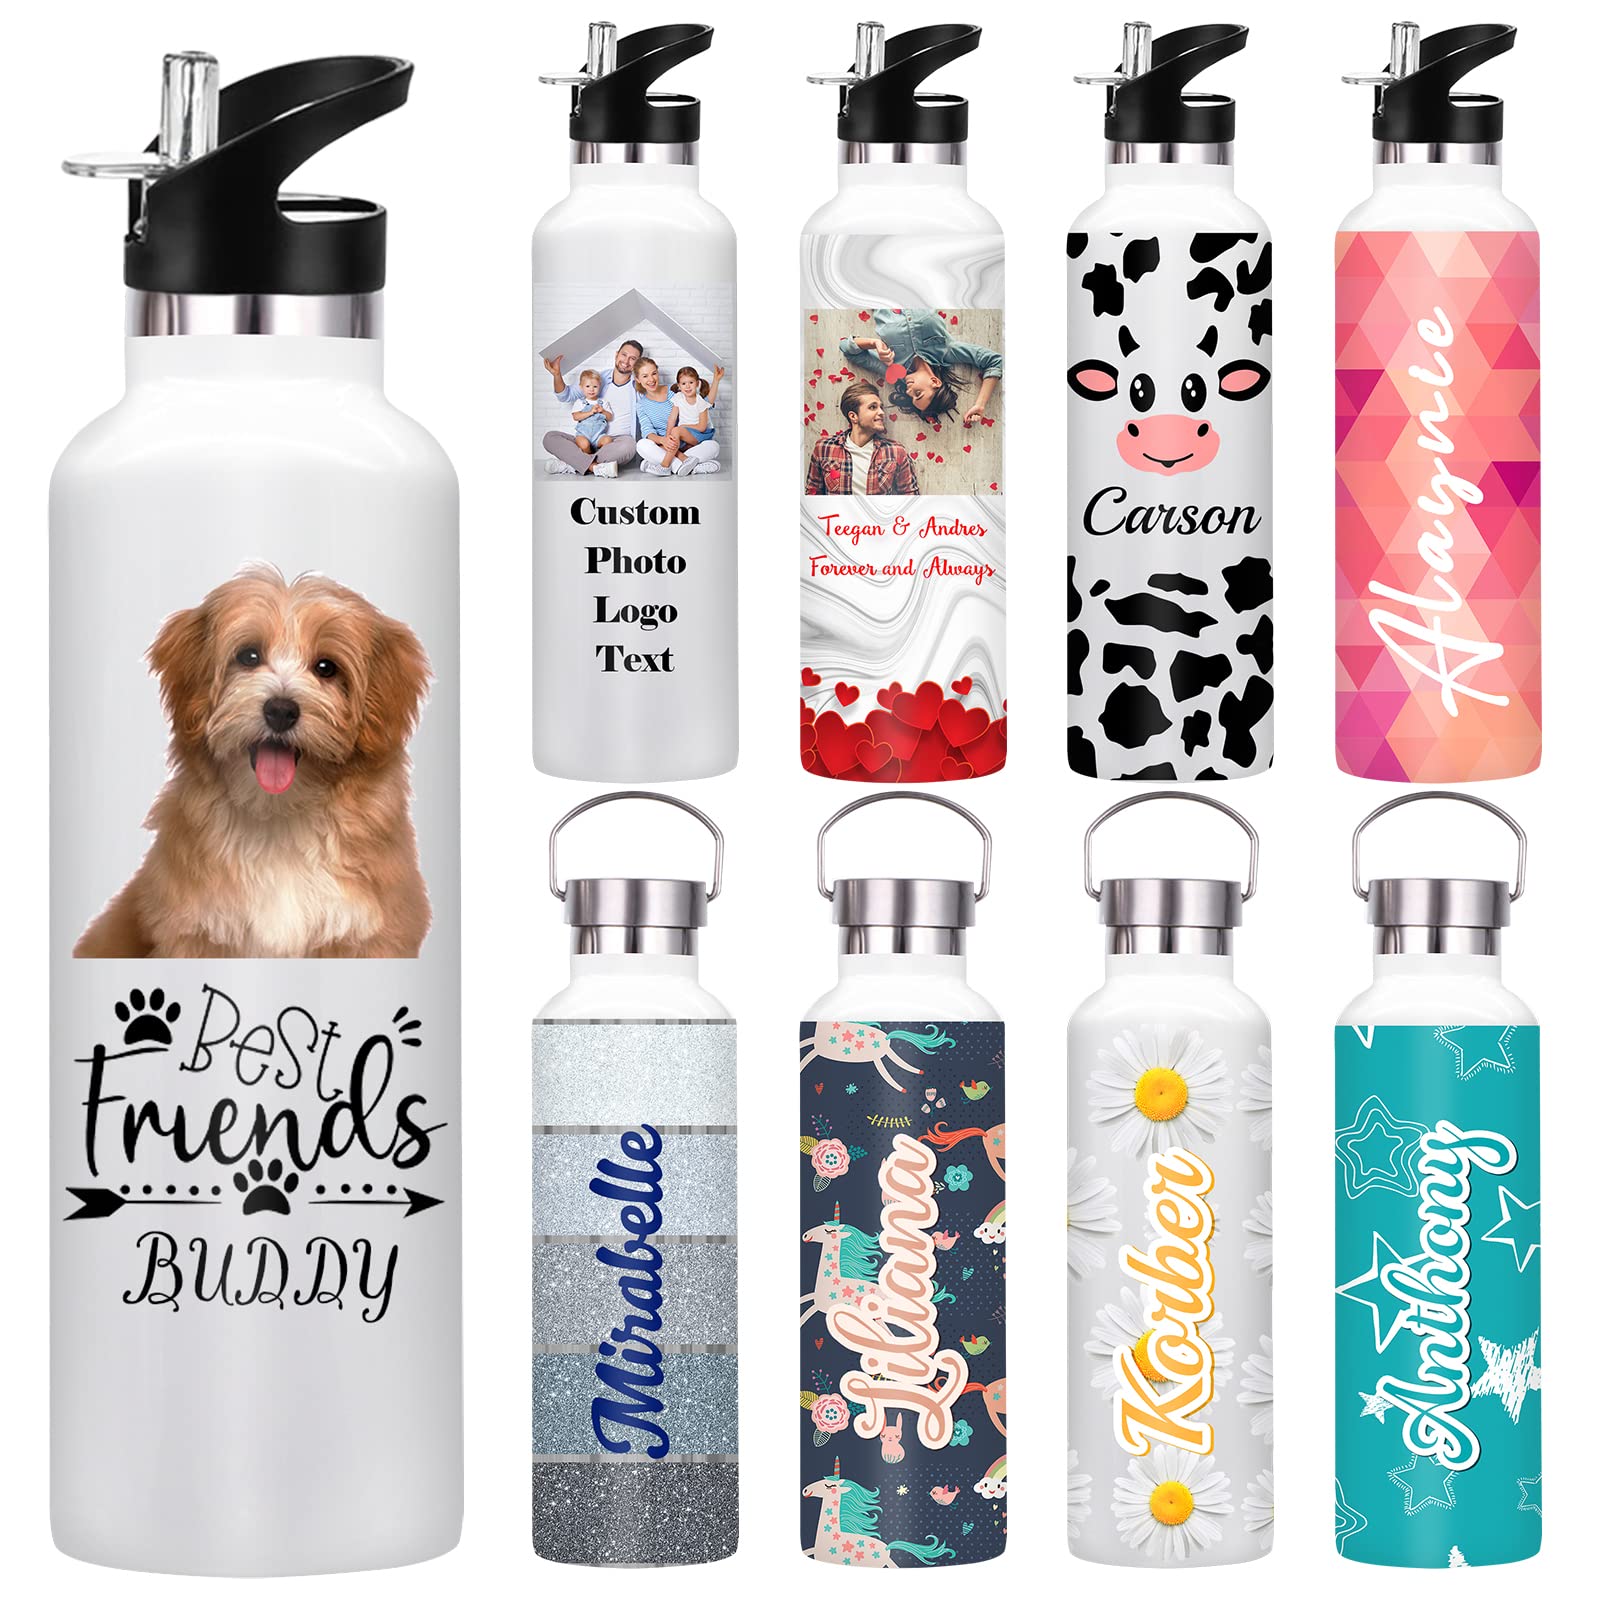 Yananka Personalized Water Bottles with Straw Lid 26 12 oz Custom Water Bottle Customized Print with Photo Name Text Logo for Women Men